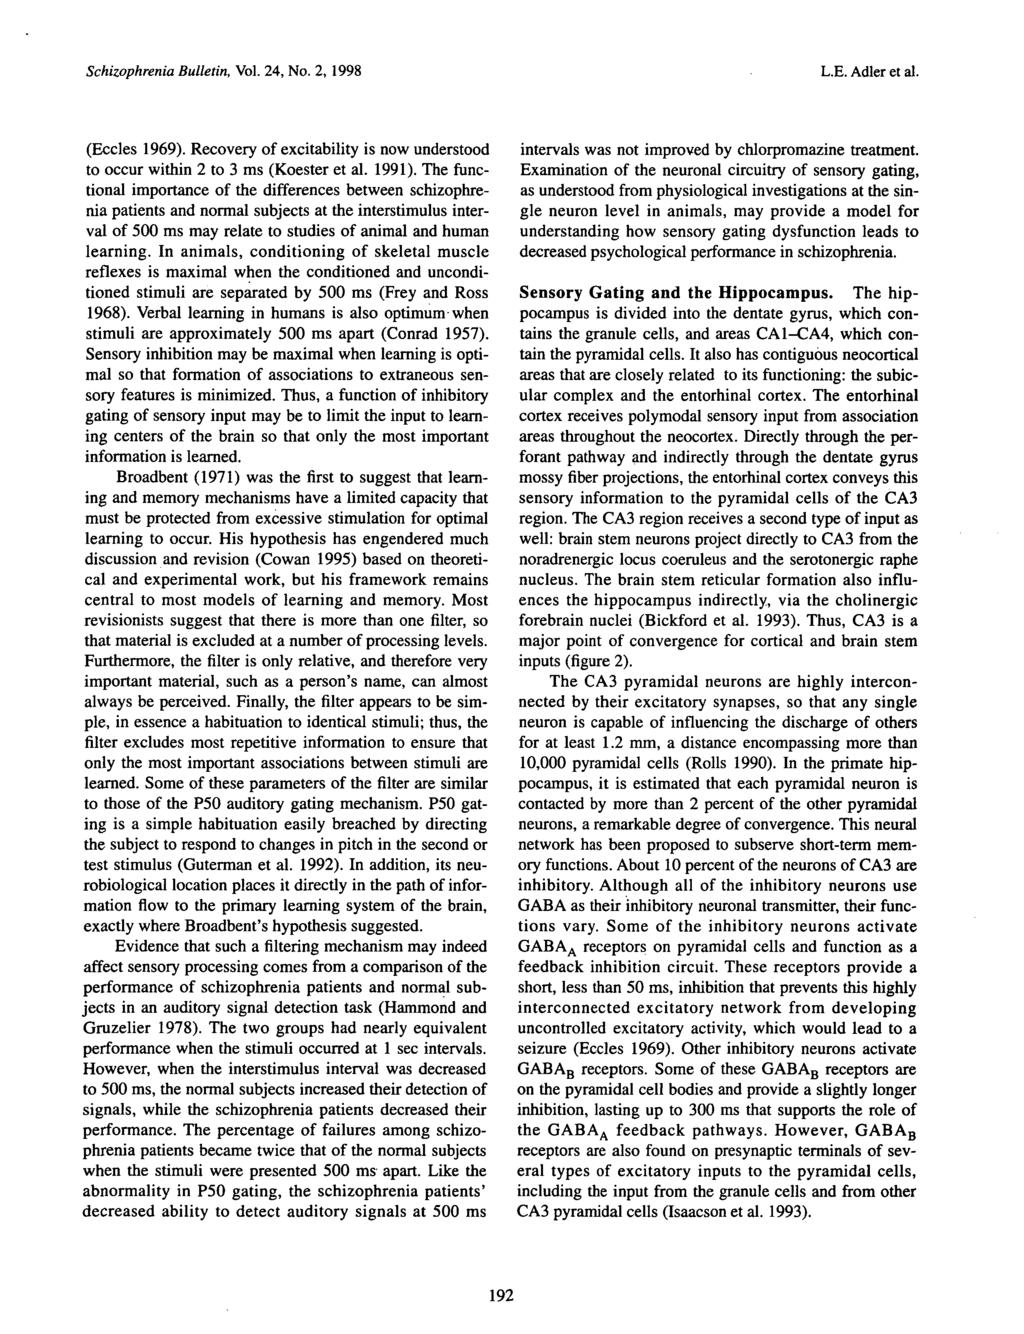 Schizophrenia Bulletin, Vol. 24, No. 2, 1998 L.E. Adler et al. (Eccles 1969). Recovery of excitability is now understood to occur within 2 to 3 ms (Koester et al. 1991).